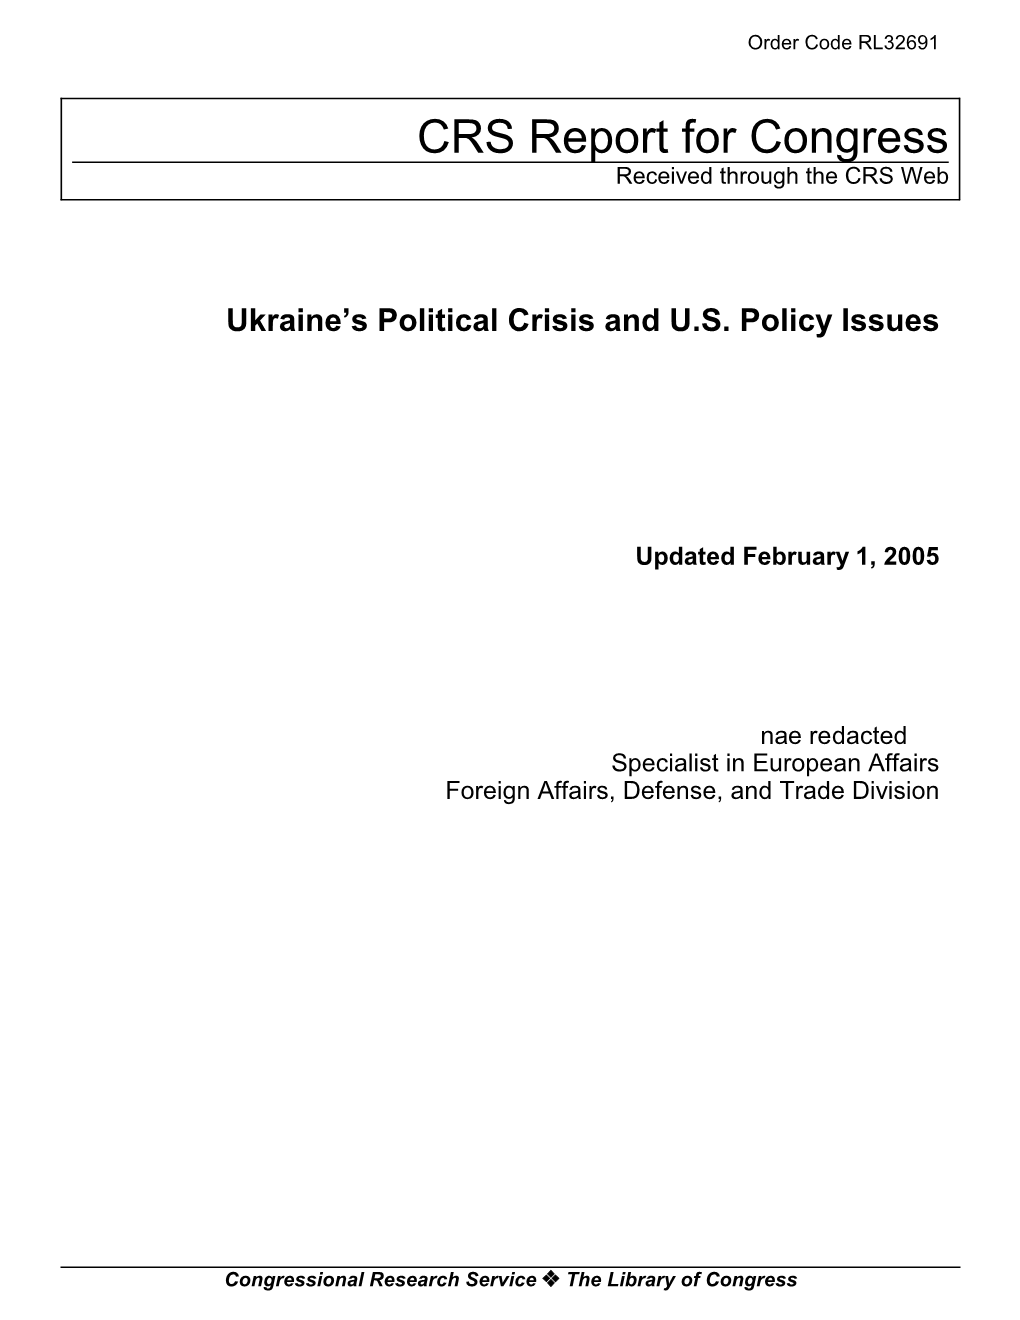 Ukraine's Political Crisis and U.S. Policy Issues